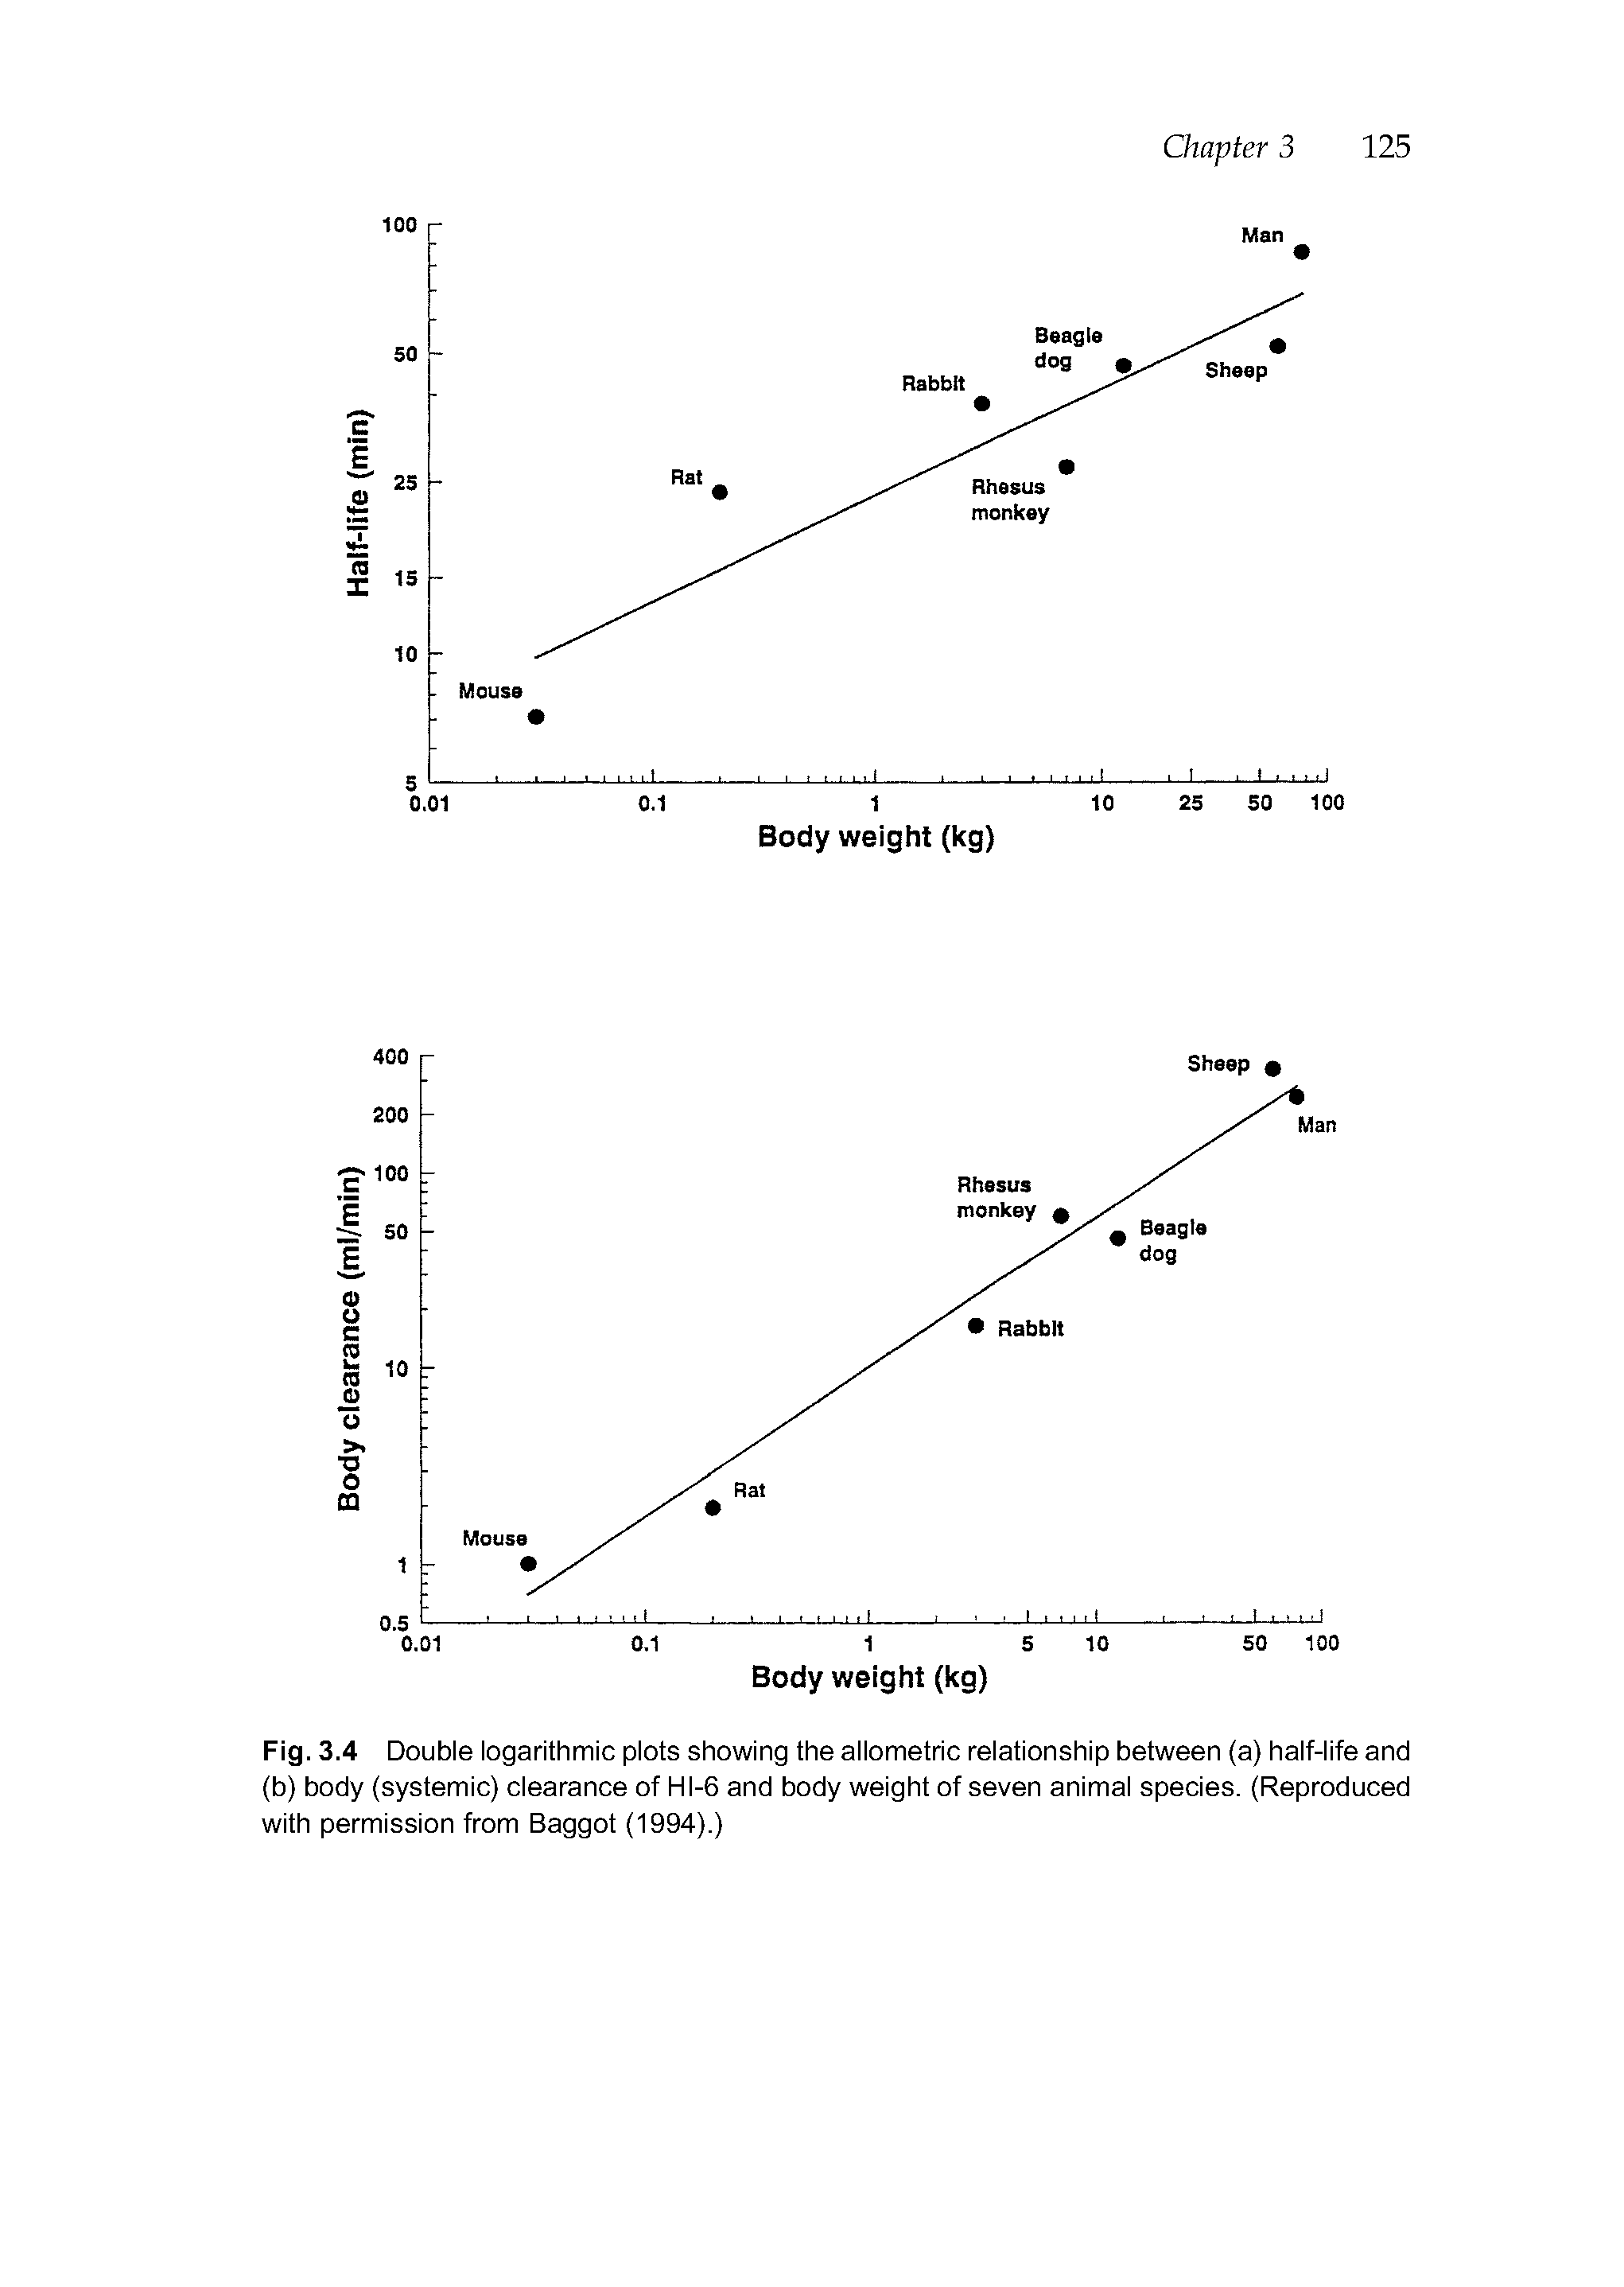 Fig. 3.4 Double logarithmic plots showing the allometric relationship between (a) half-life and (b) body (systemic) clearance of HI-6 and body weight of seven animal species. (Reproduced with permission from Baggot (1994).)...